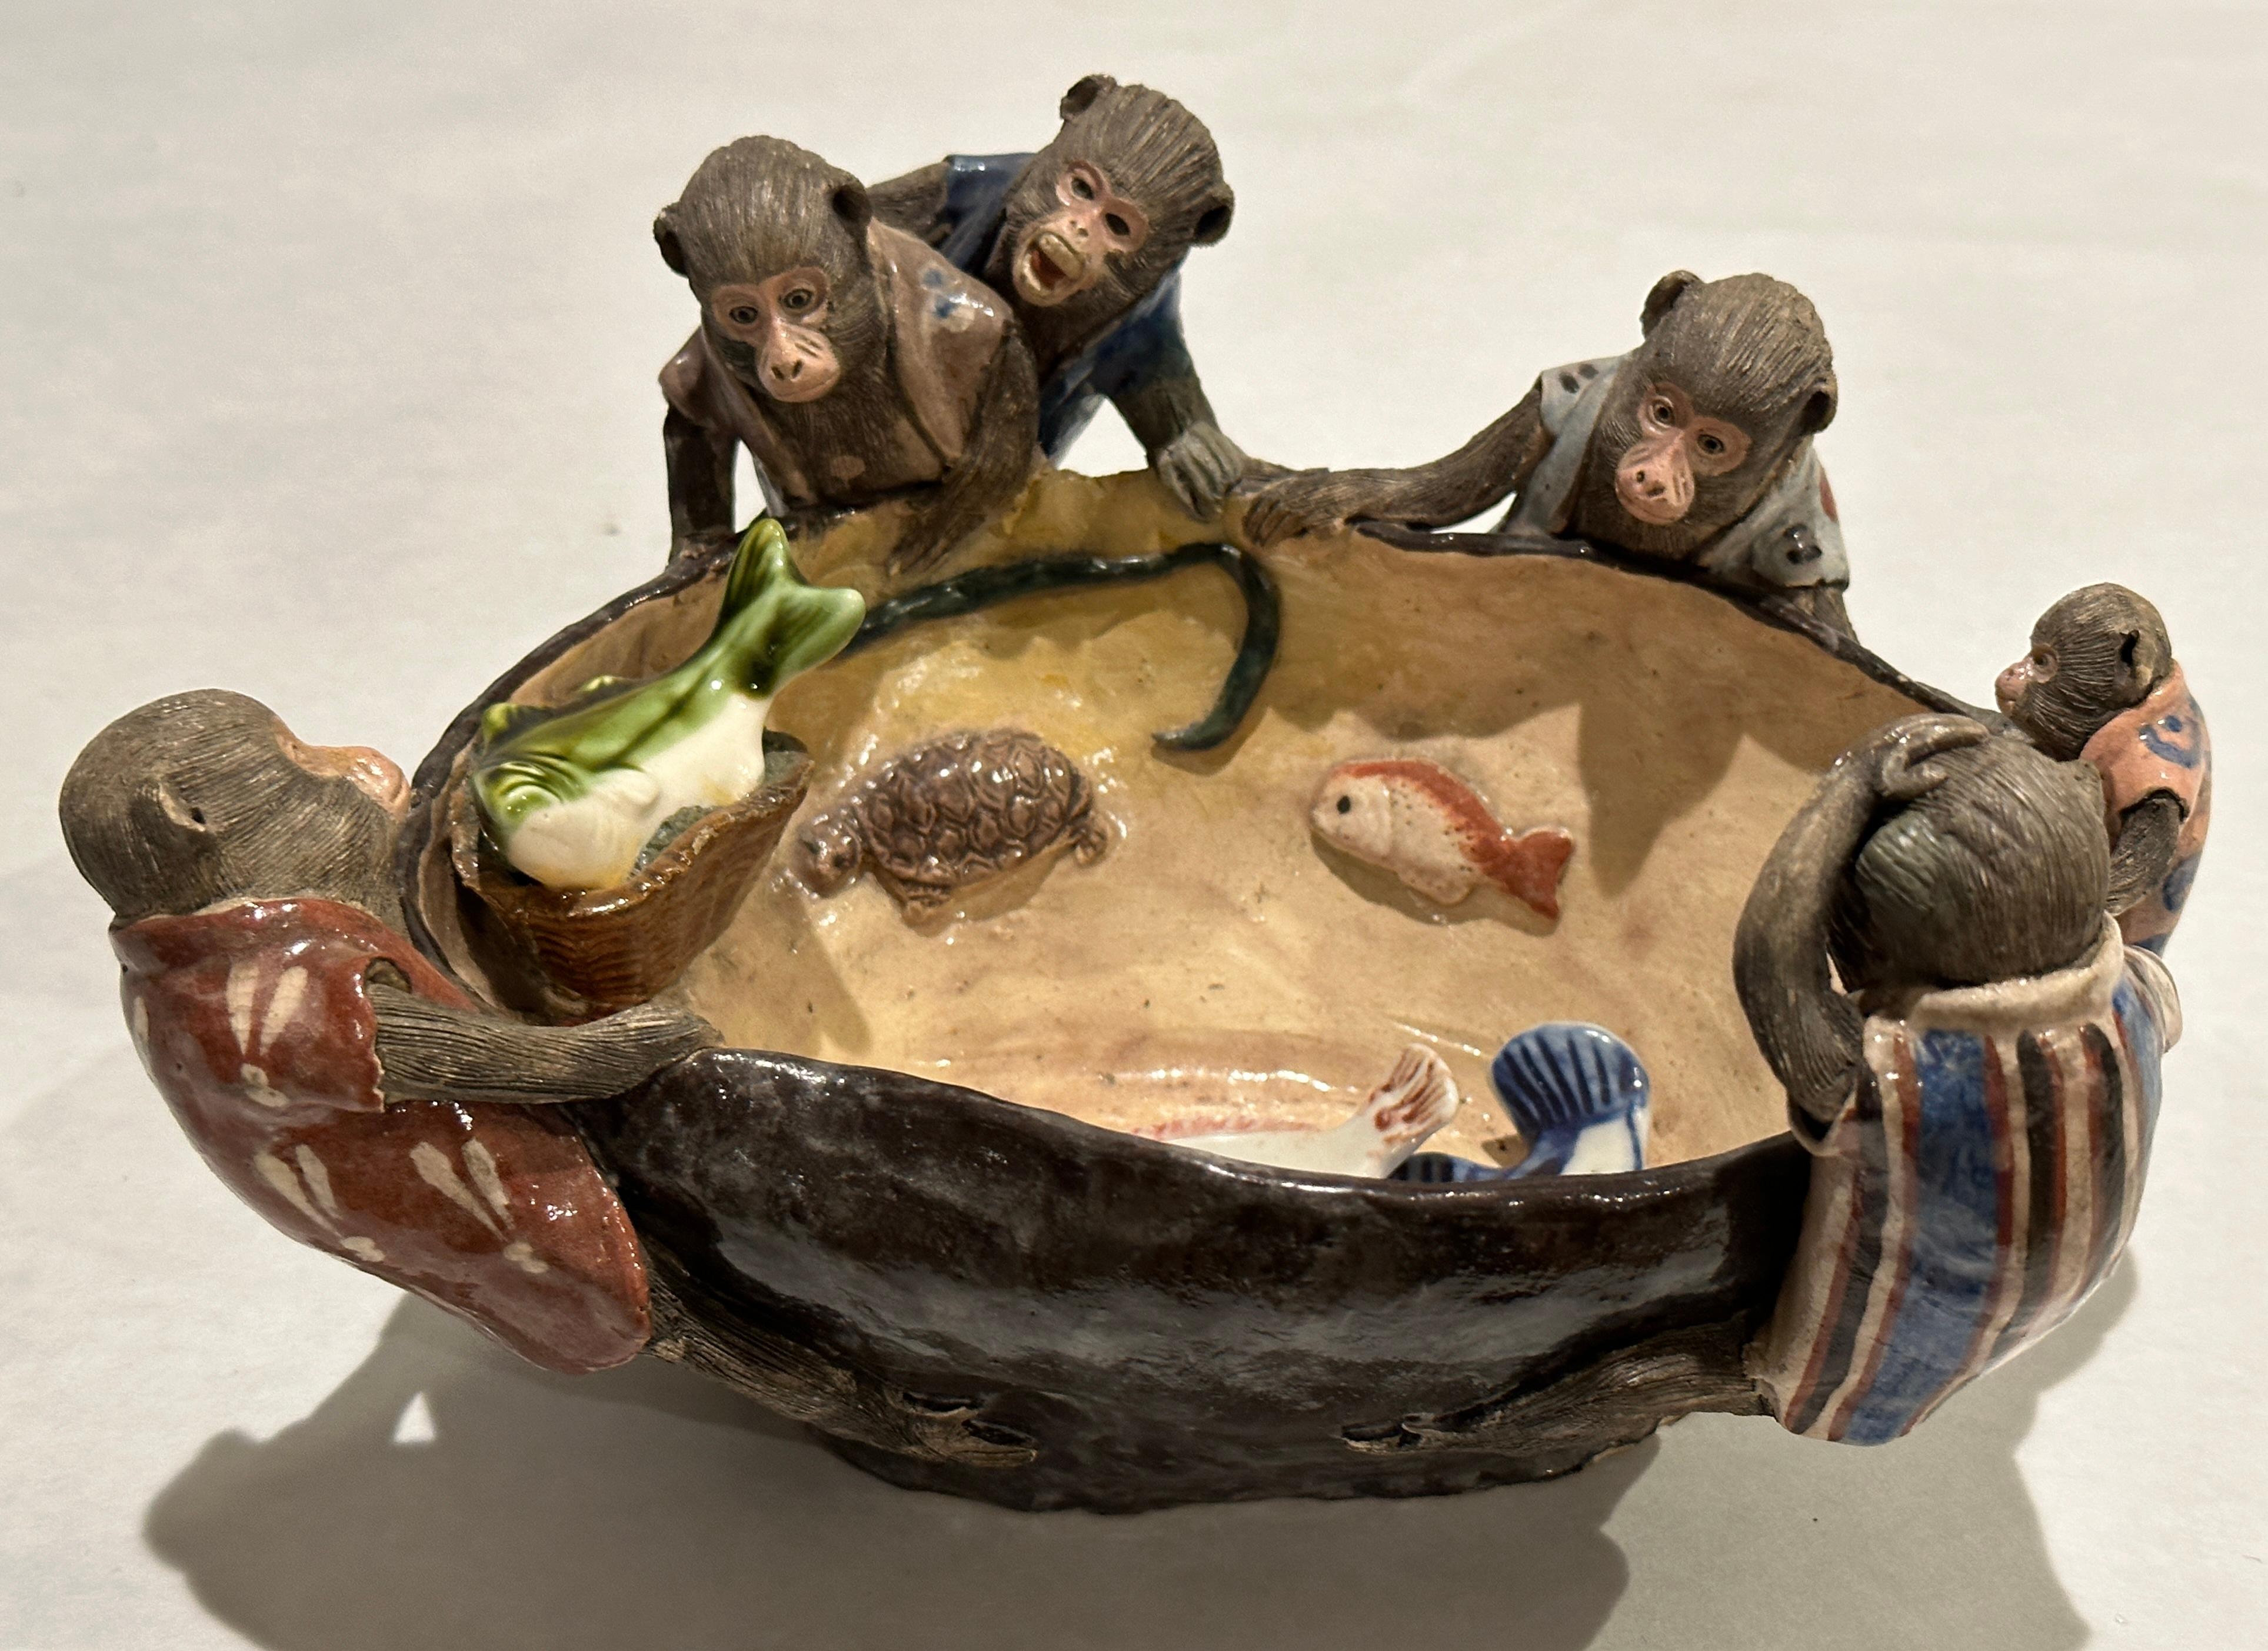 Fine example and splendid work of art from the Sumida Gawa pottery. Highly desirable image and type.
It is a heavy pottery with highly detailed applied figures of monkeys gazing with different expressions into a pond with fish and a turtle. Many